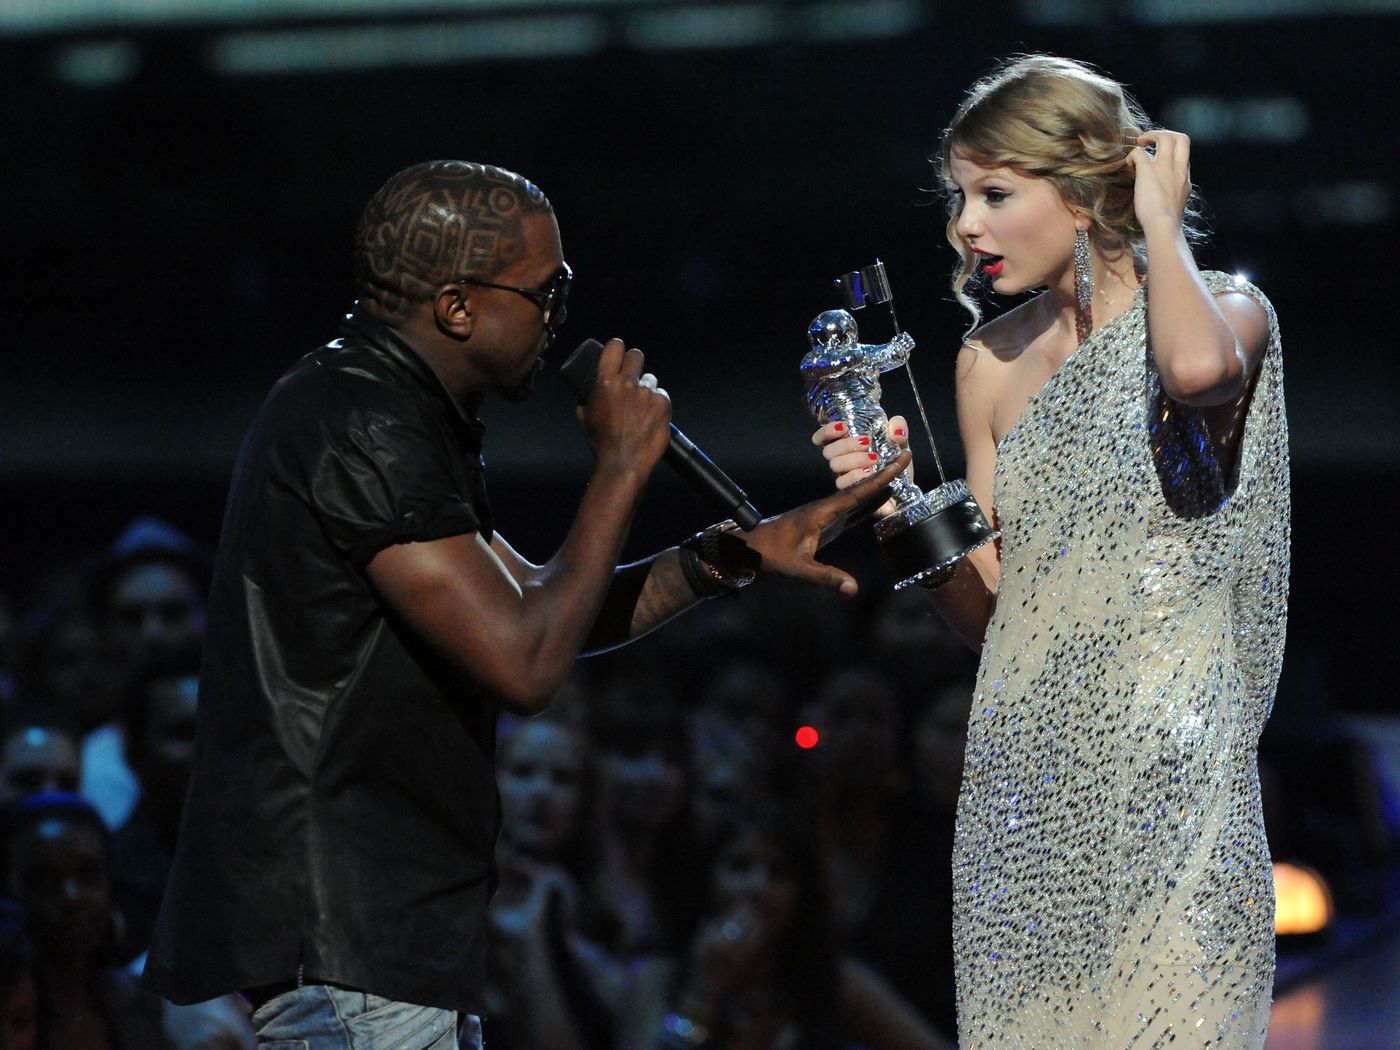 kanye-west-takes-a-jab-at-taylor-swift-over-grammy-win-difference